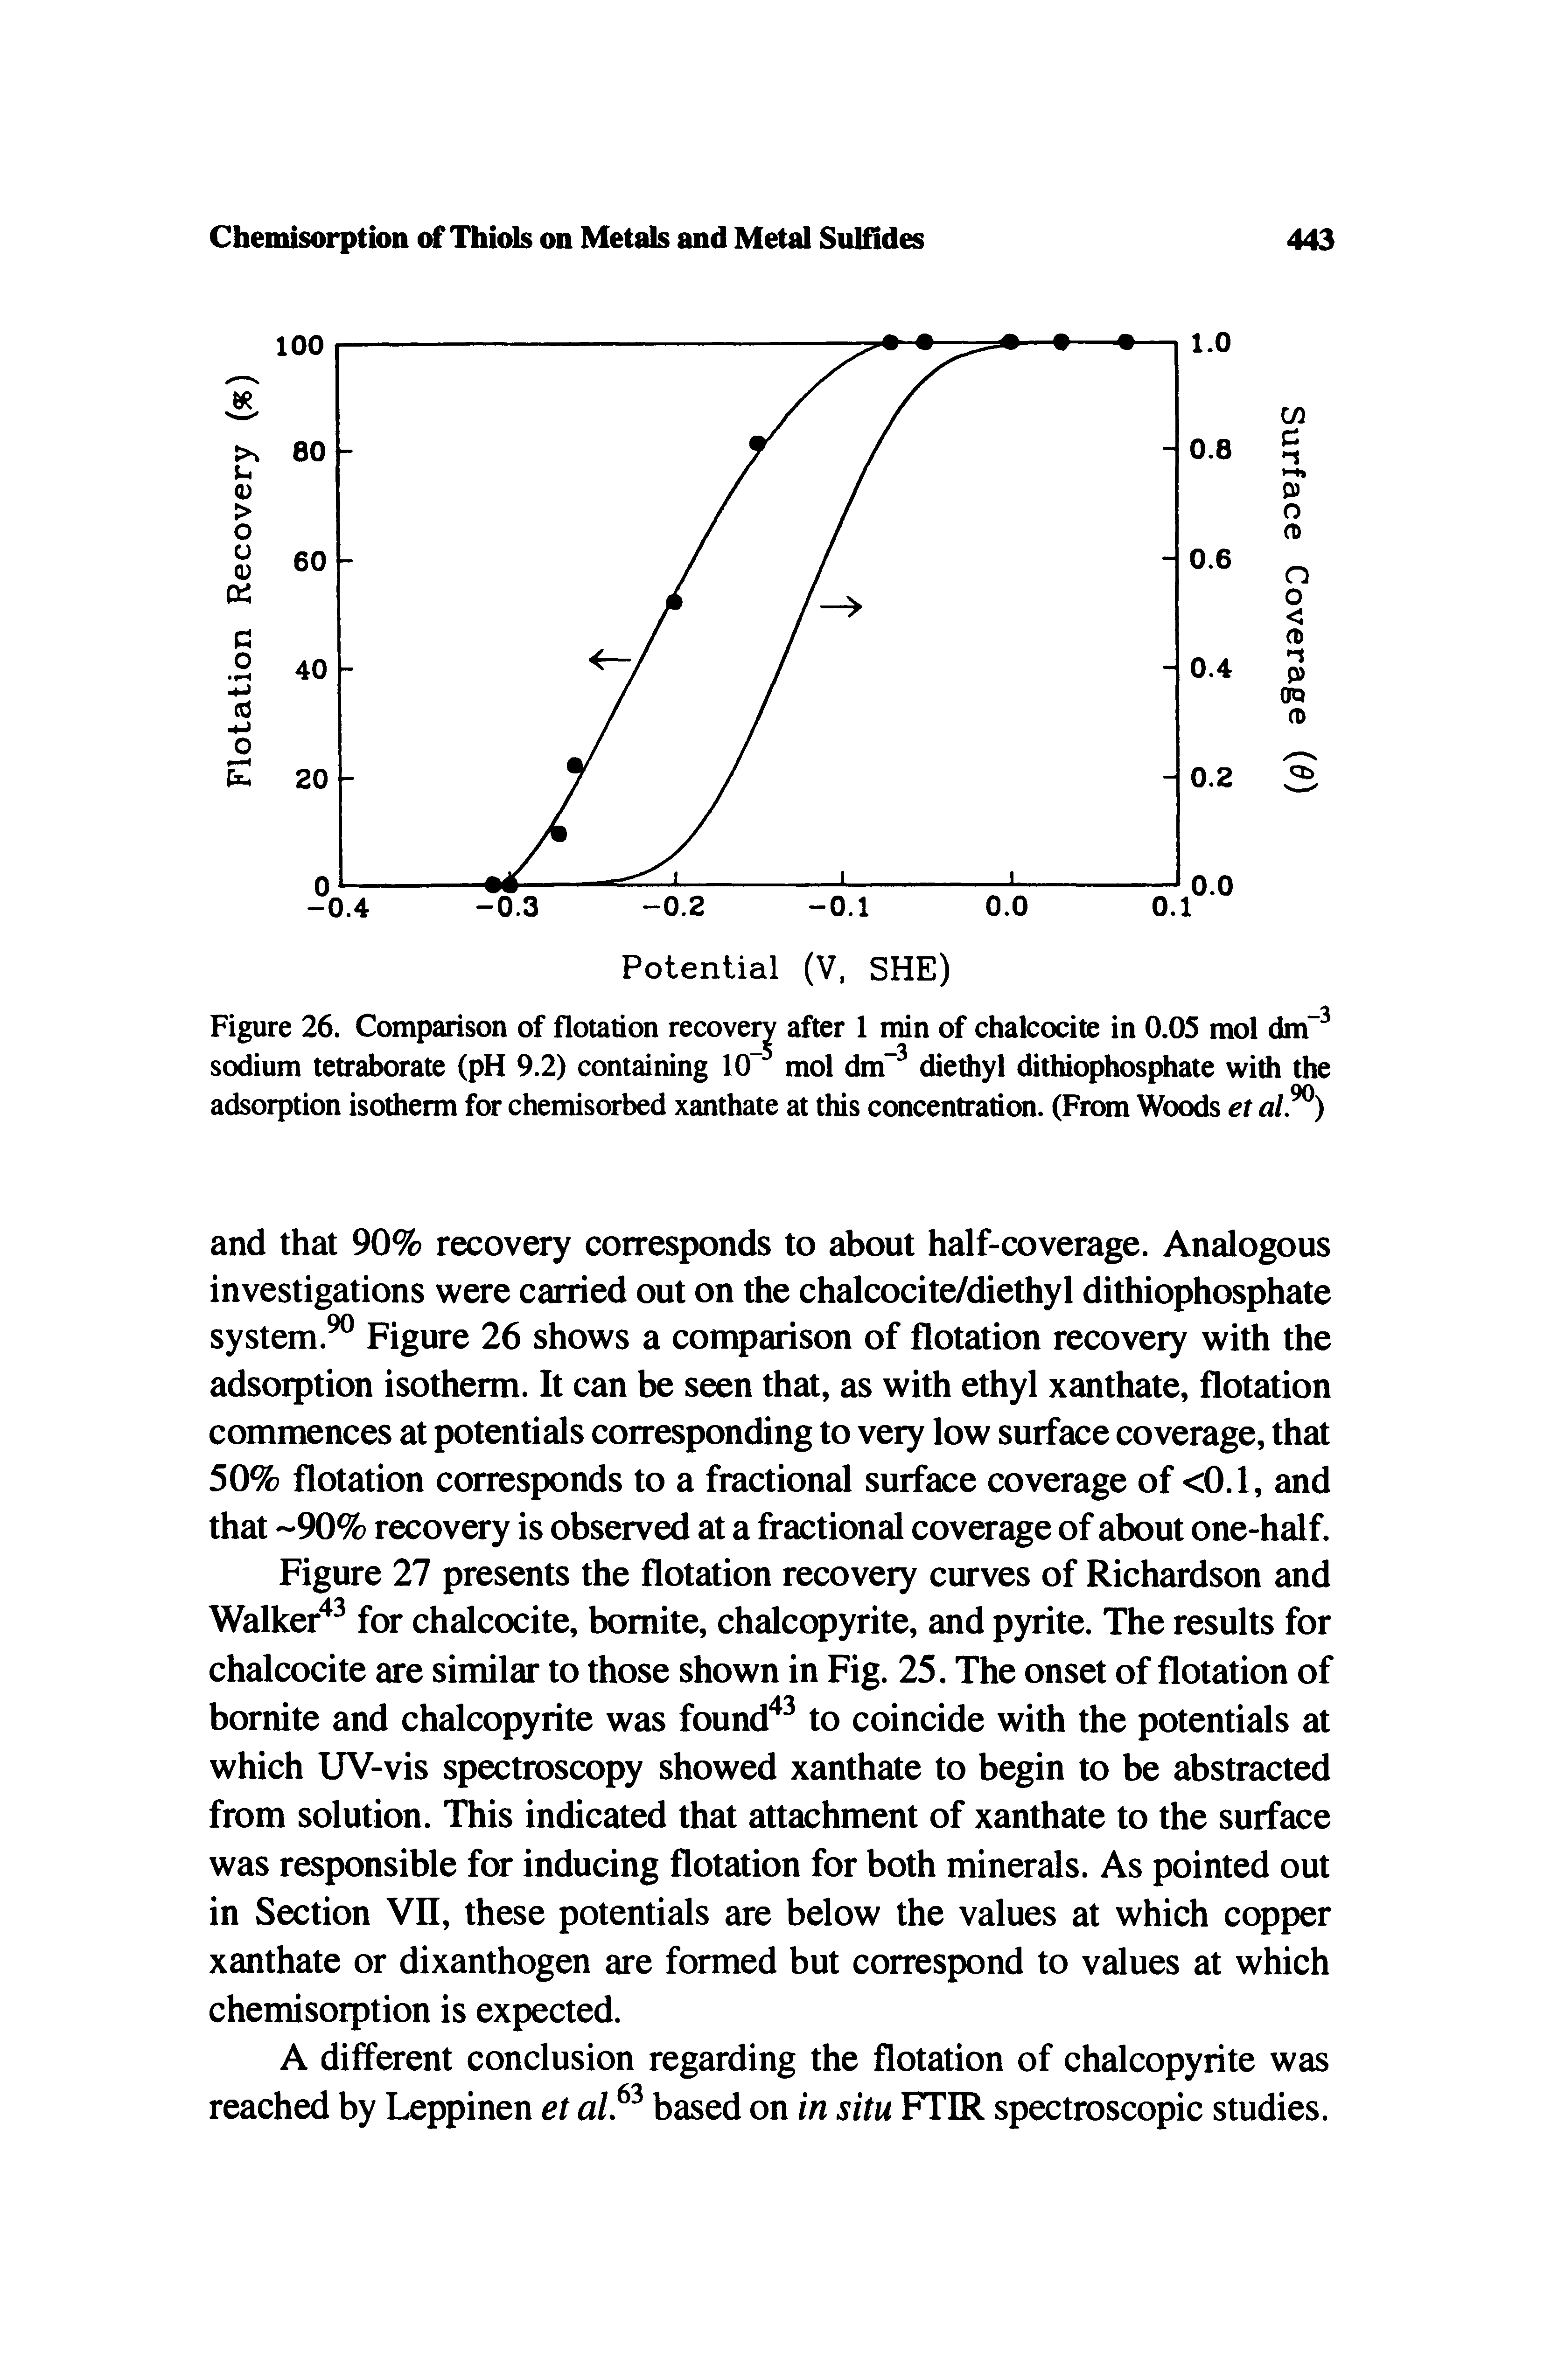 Figure 27 presents the flotation recovery curves of Richardson and Walker" for chalcocite, bomite, chalcopyrite, and pyrite. The results for chalcocite are similar to those shown in Fig. 25. The onset of flotation of bornite and chalcopyrite was found" to coincide with the potentials at which UV-vis spectroscopy showed xanthate to begin to be abstracted from solution. This indicated that attachment of xanthate to the surface was responsible for inducing flotation for both minerals. As pointed out in Section VII, these potentials are below the values at which copper xanthate or dixanthogen are formed but correspond to values at which chemisorption is expected.